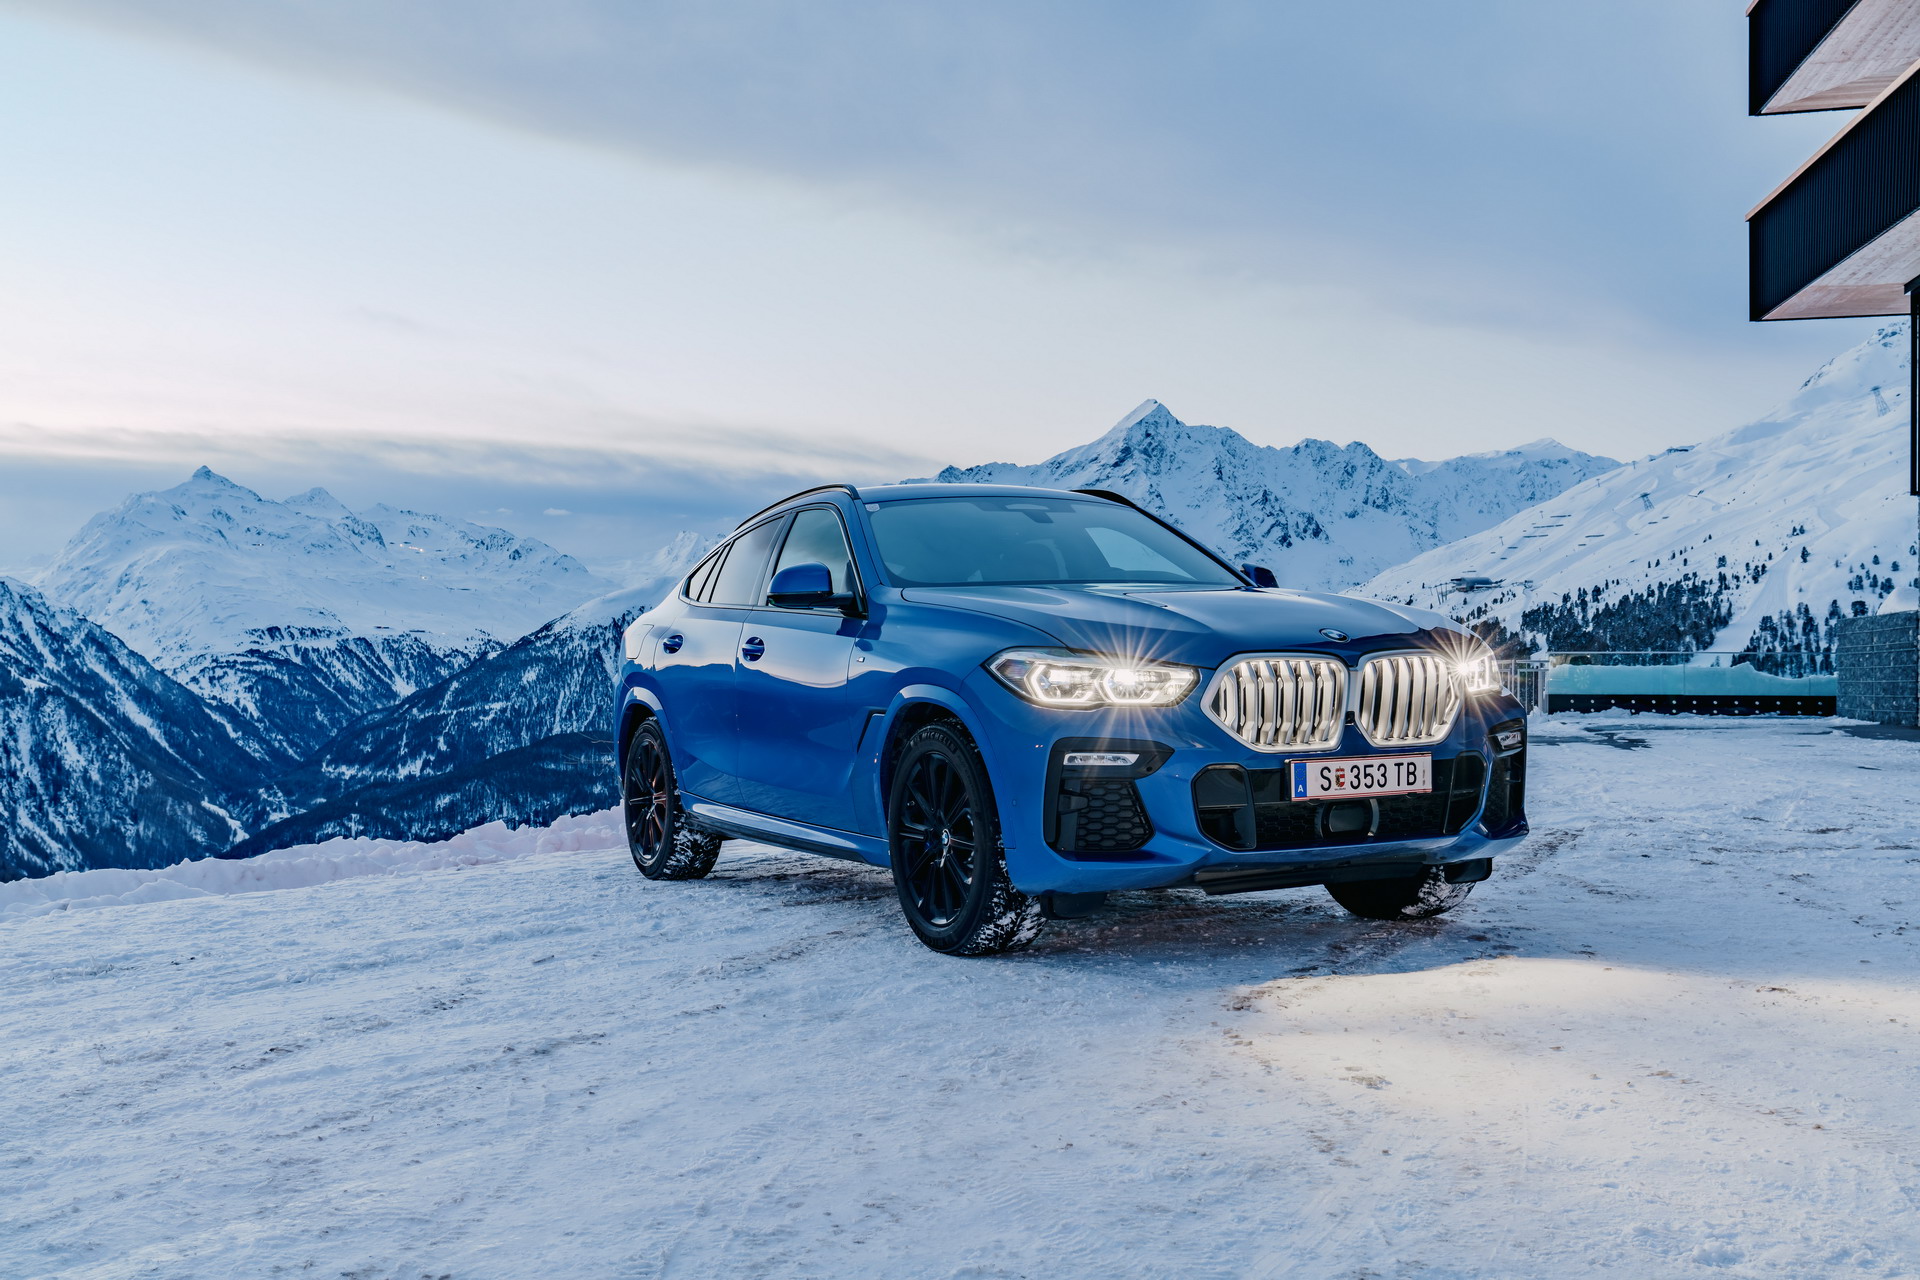 The new X6 and 8 Series Gran Coupe in Solden 24